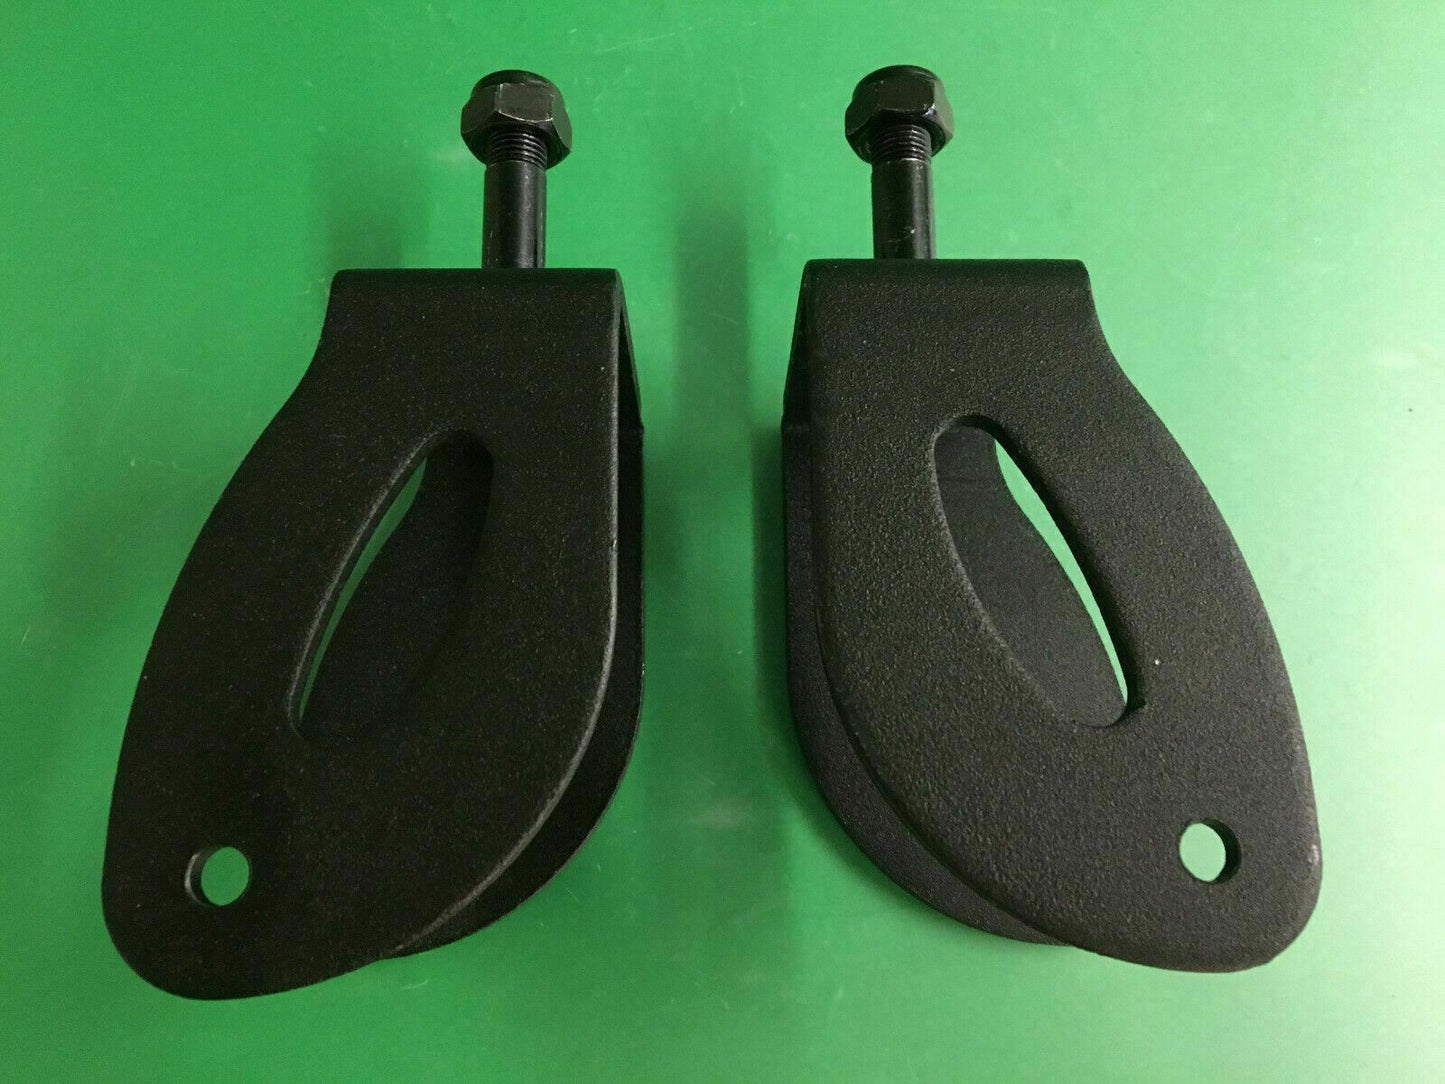 Front & Rear Caster Forks for Merits P326 RED Power Wheelchair #E176